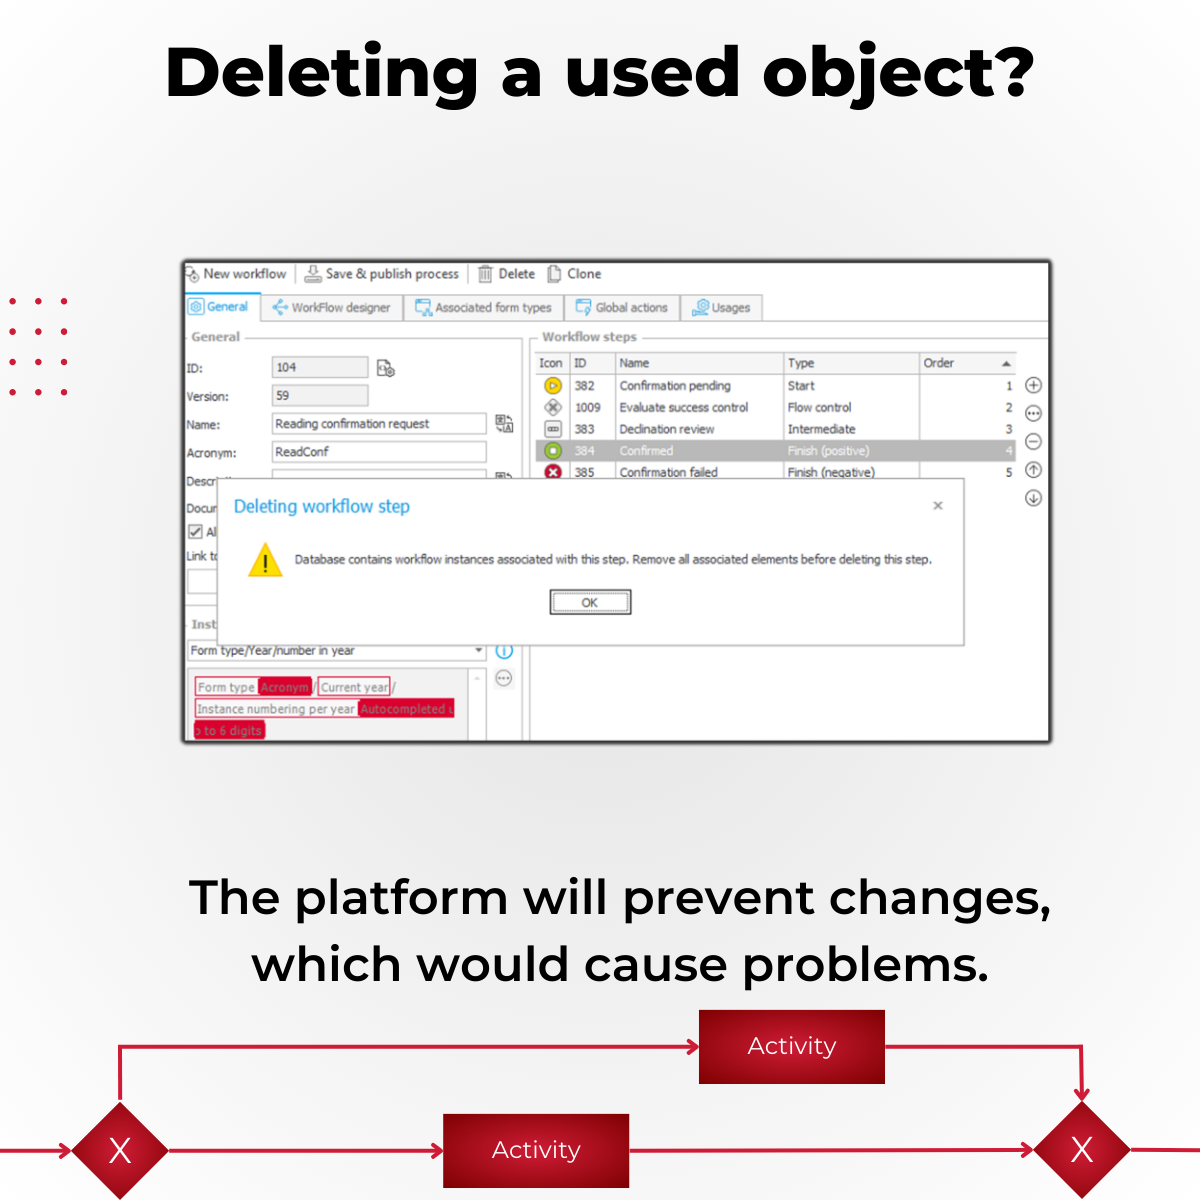 Deletion is prevented, if a step was used.